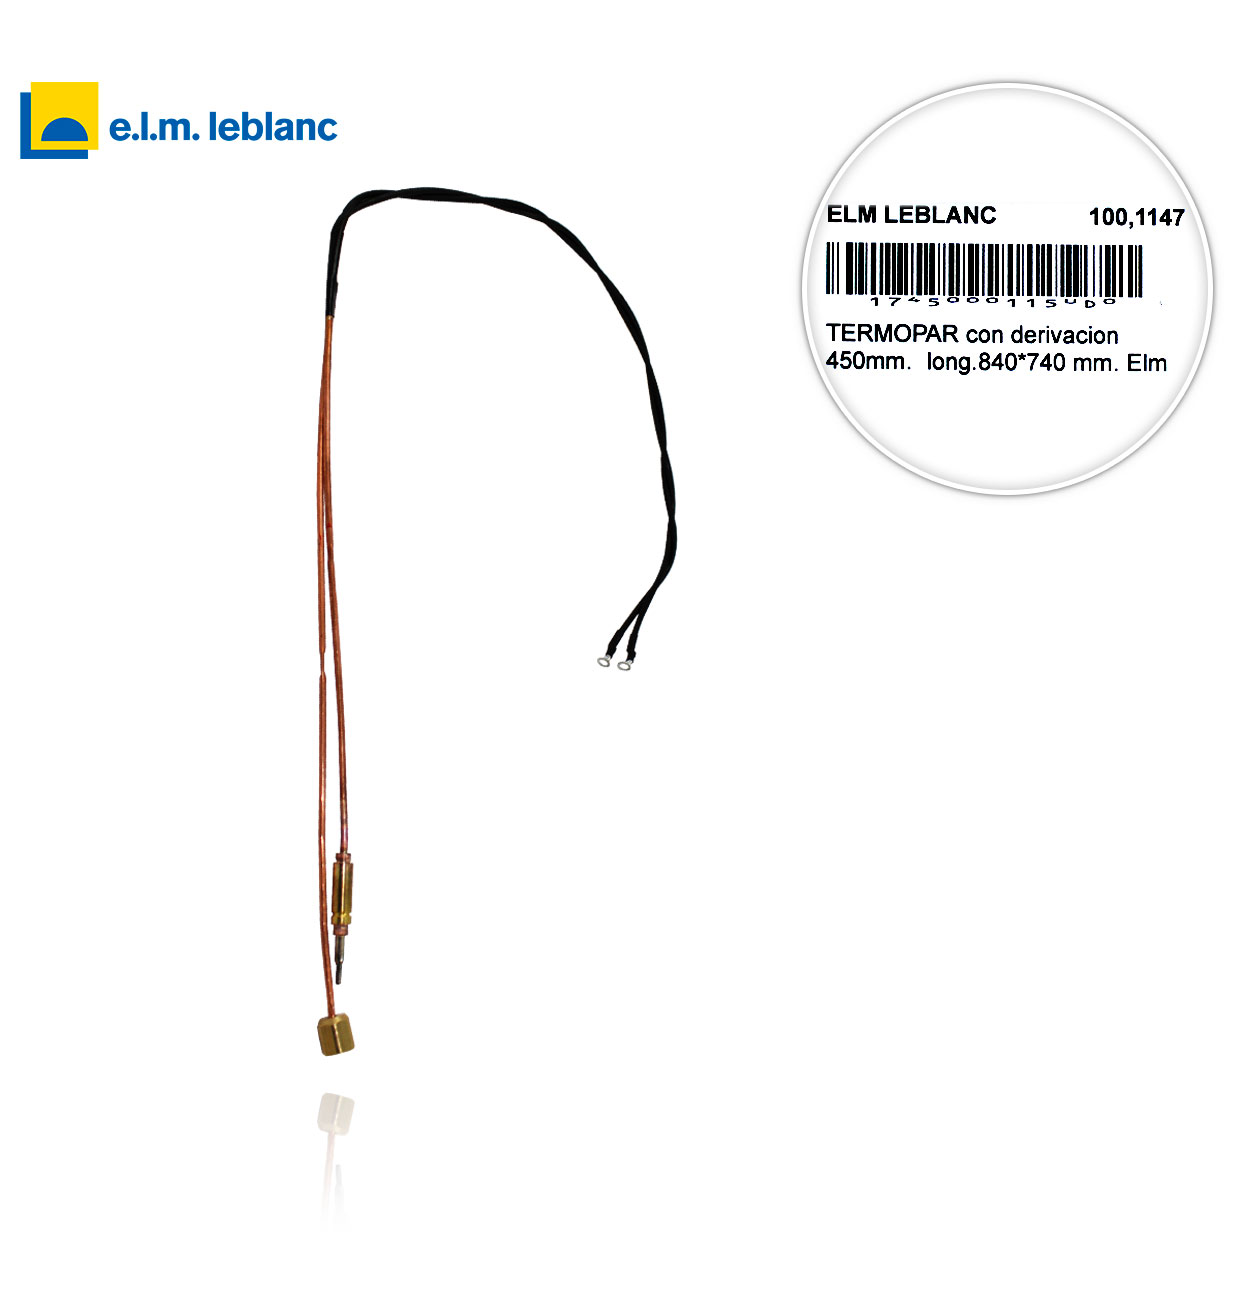 450mm  840x740 mm-long Elm Leblanc THERMOCOUPLE with bypass